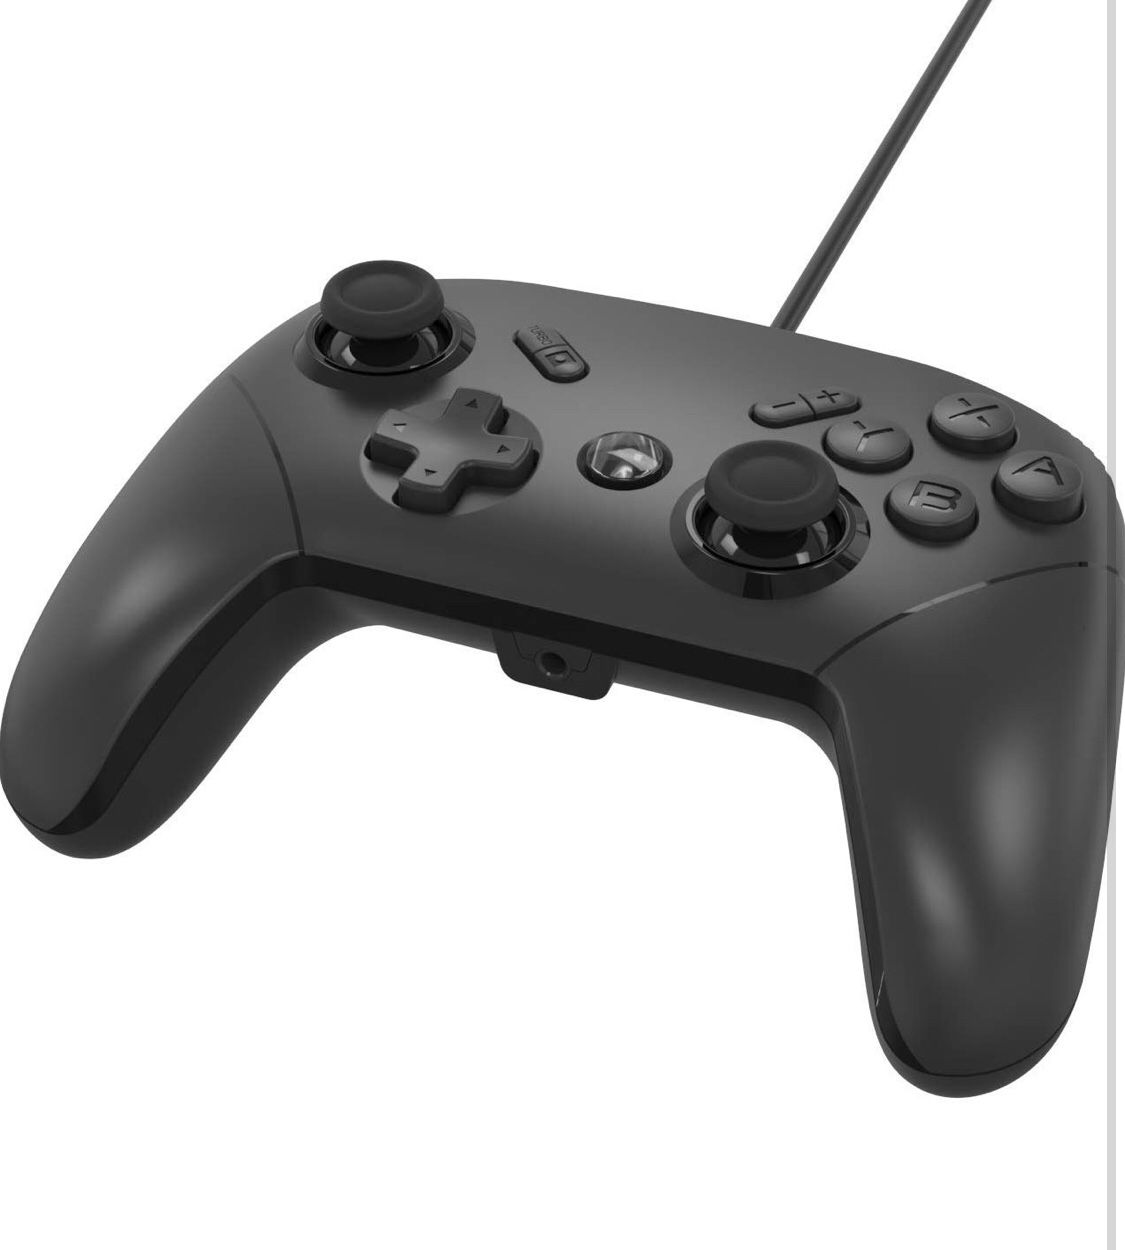 Switch Audio Wired Pro Controller With built in Headset Jack for Nintendo Switch/PC